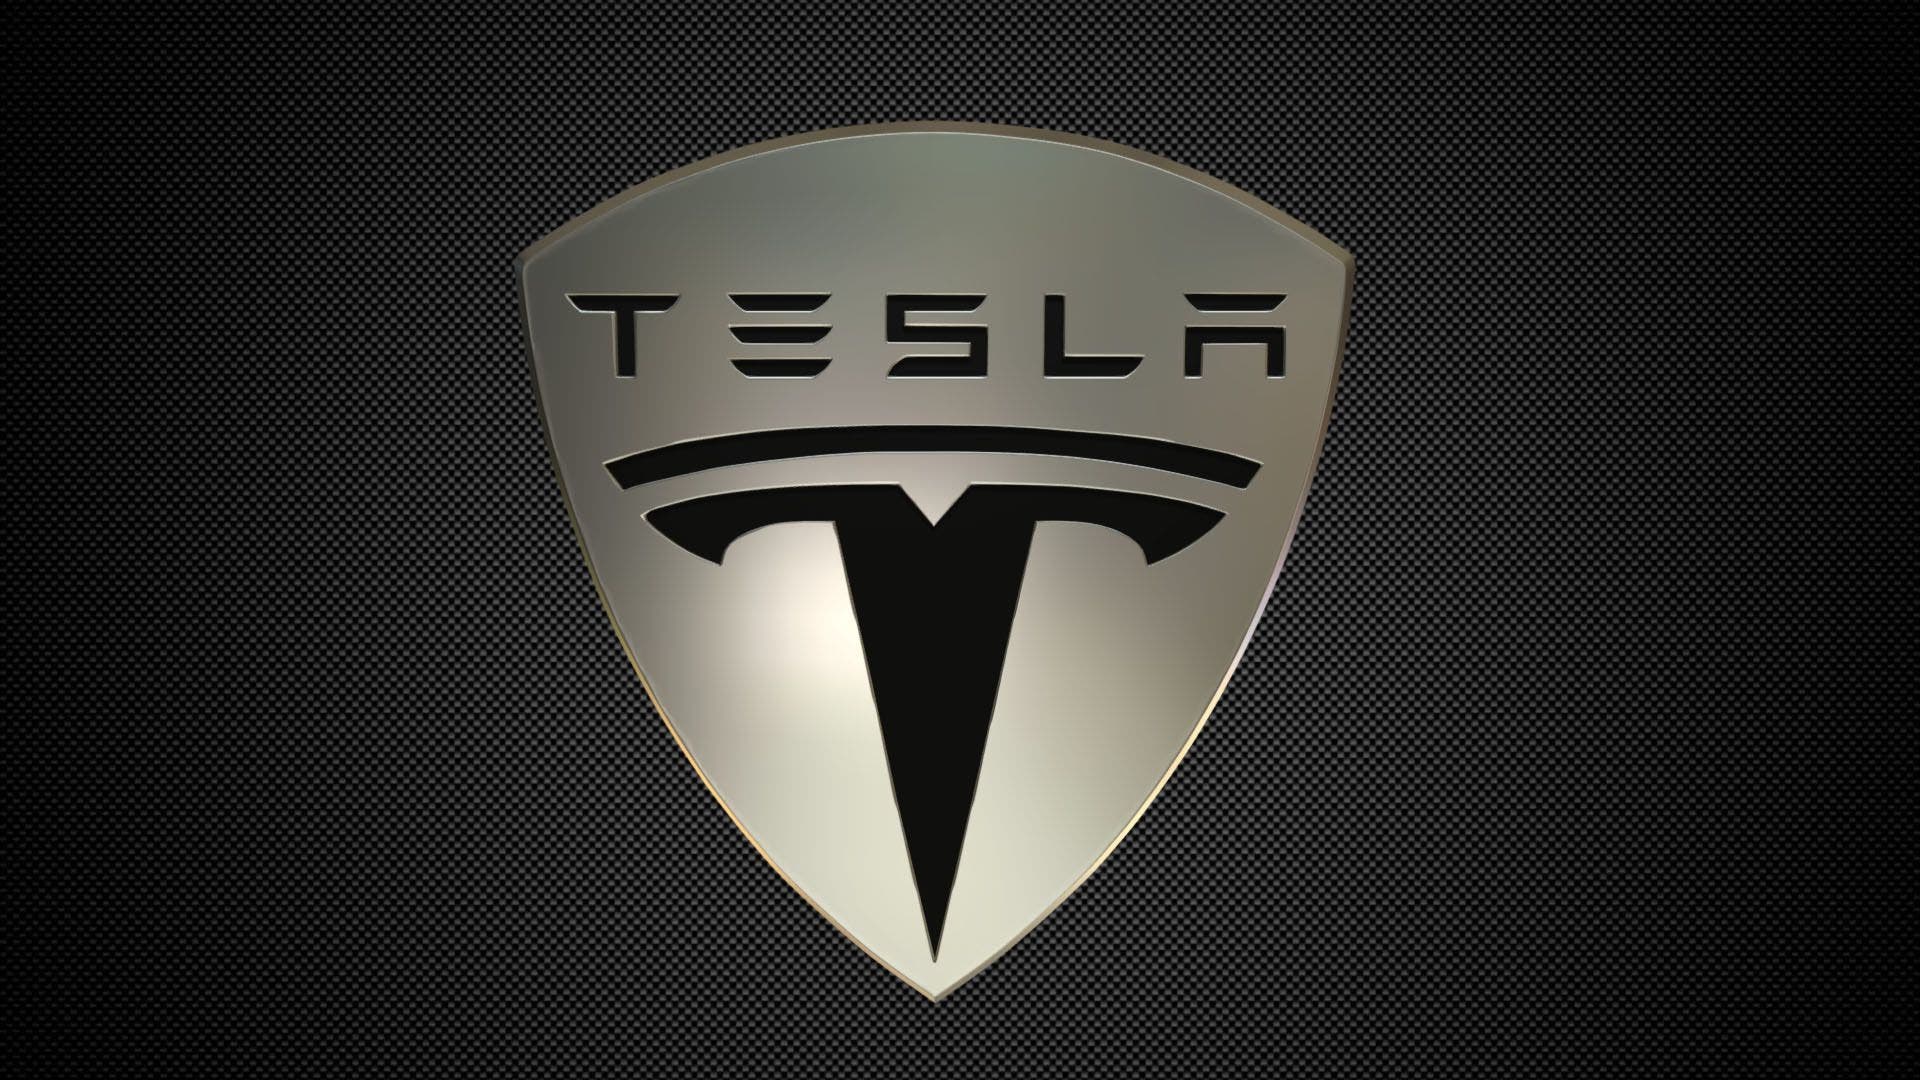 Tesla, Dell And 1 Other Technology Stock Insiders Are Selling